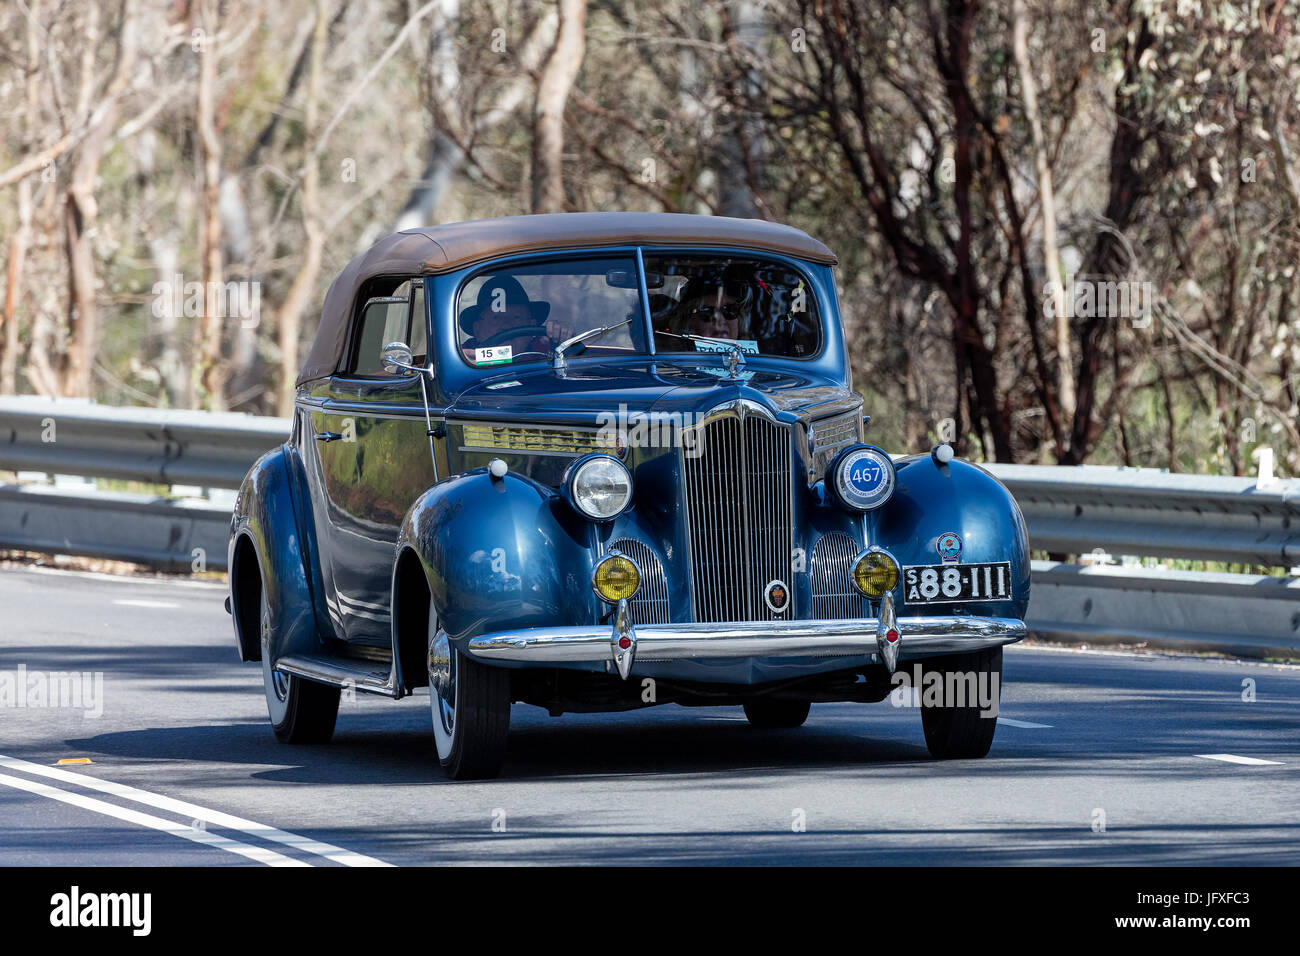 Vintage 1940 Packard 110 Convertible Coupe driving on country roads near the town of Birdwood, South Australia. Stock Photo